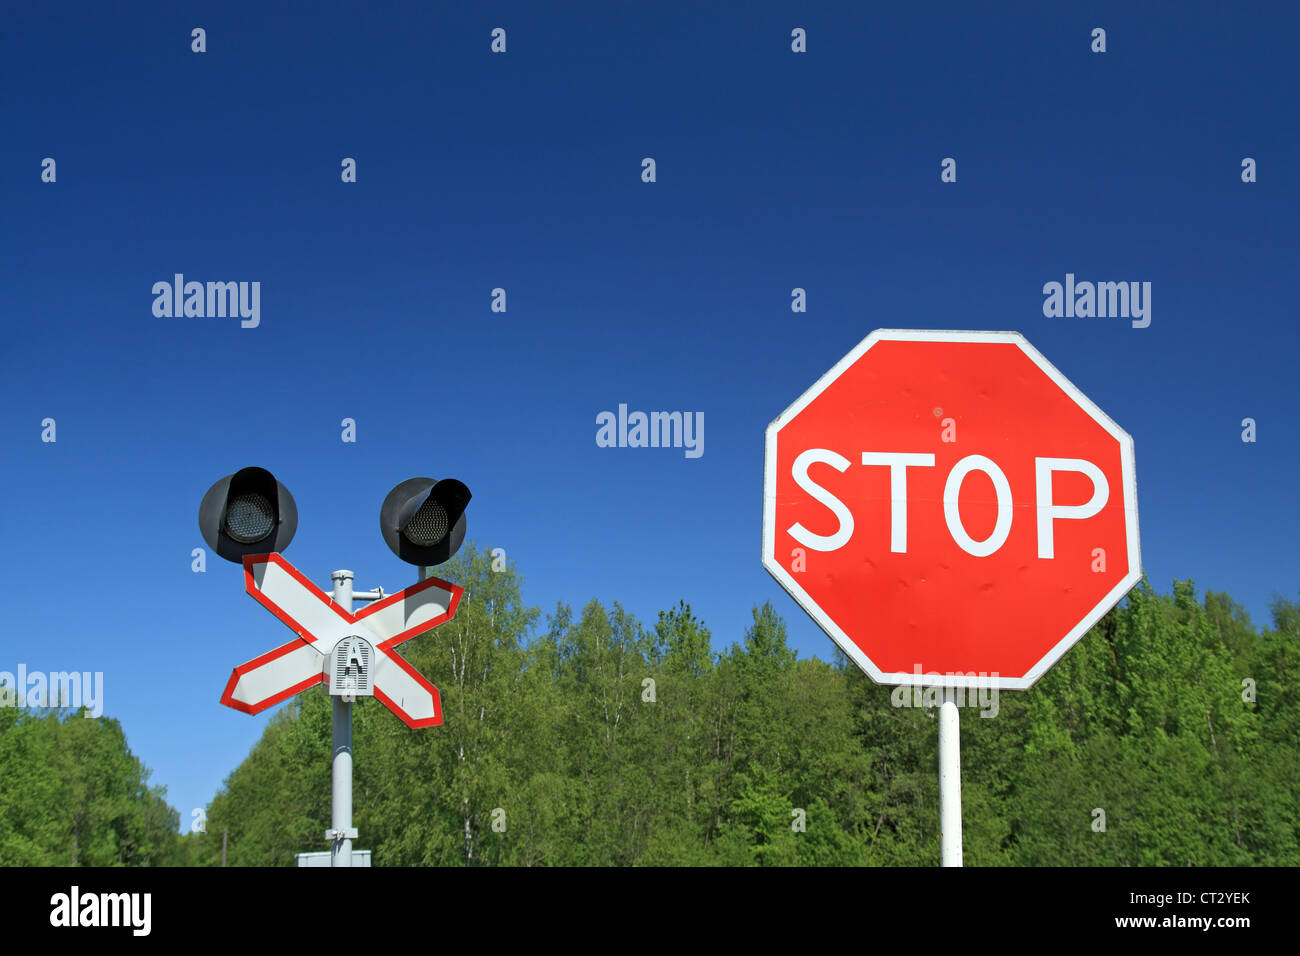 traffic sign on railway stations Stock Photo